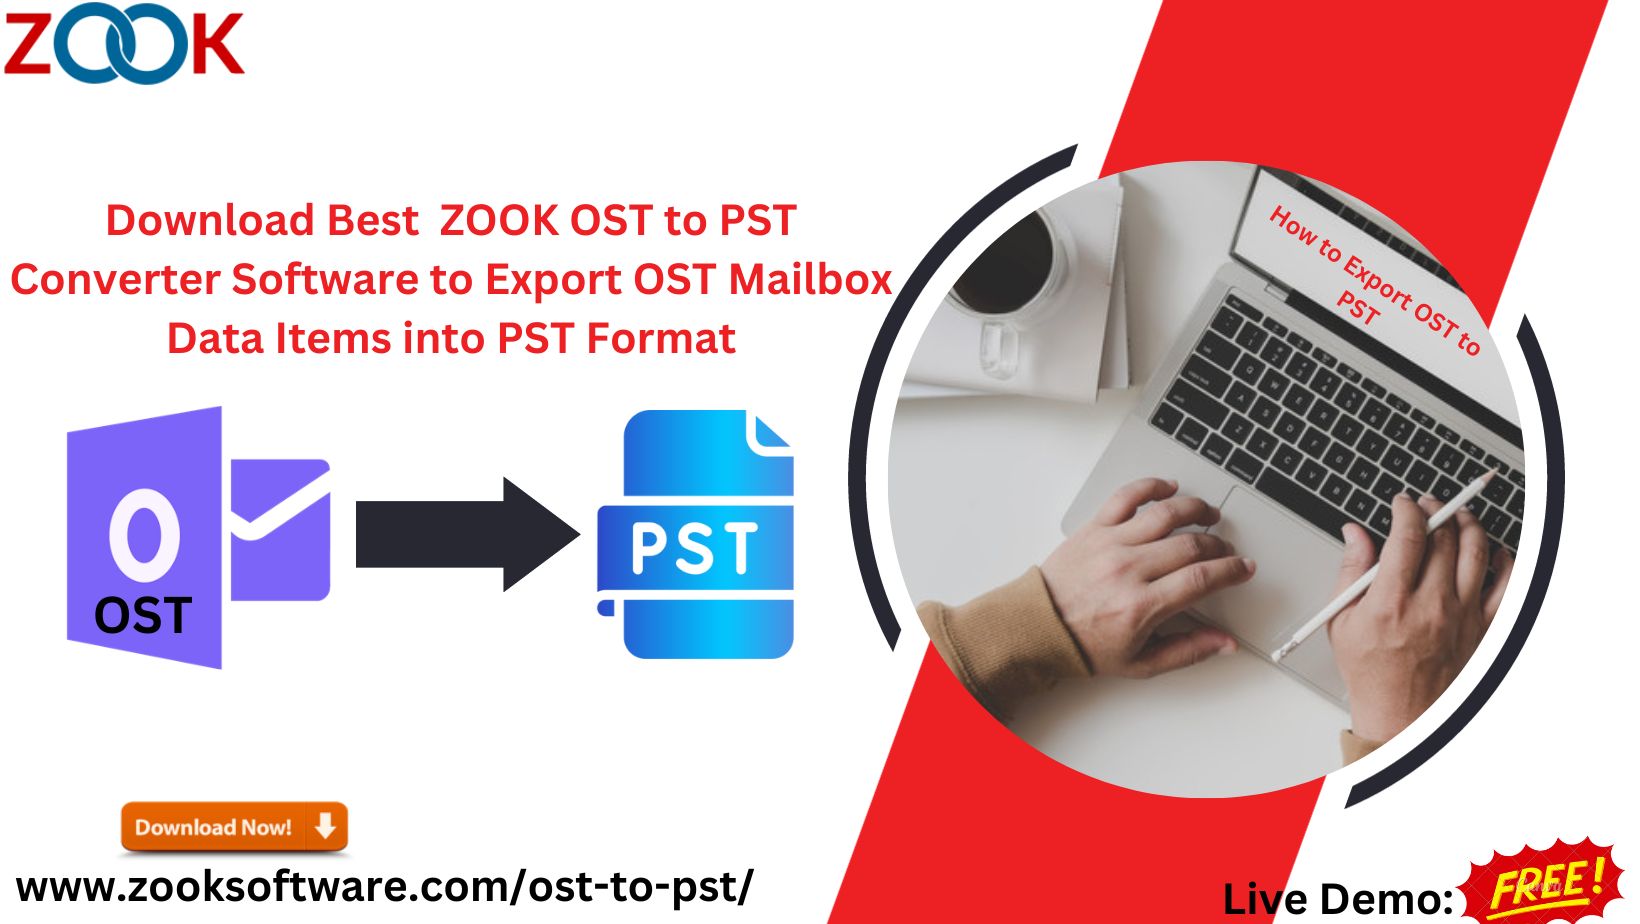 How to Convert OST to PST Files - Top 4 Methods